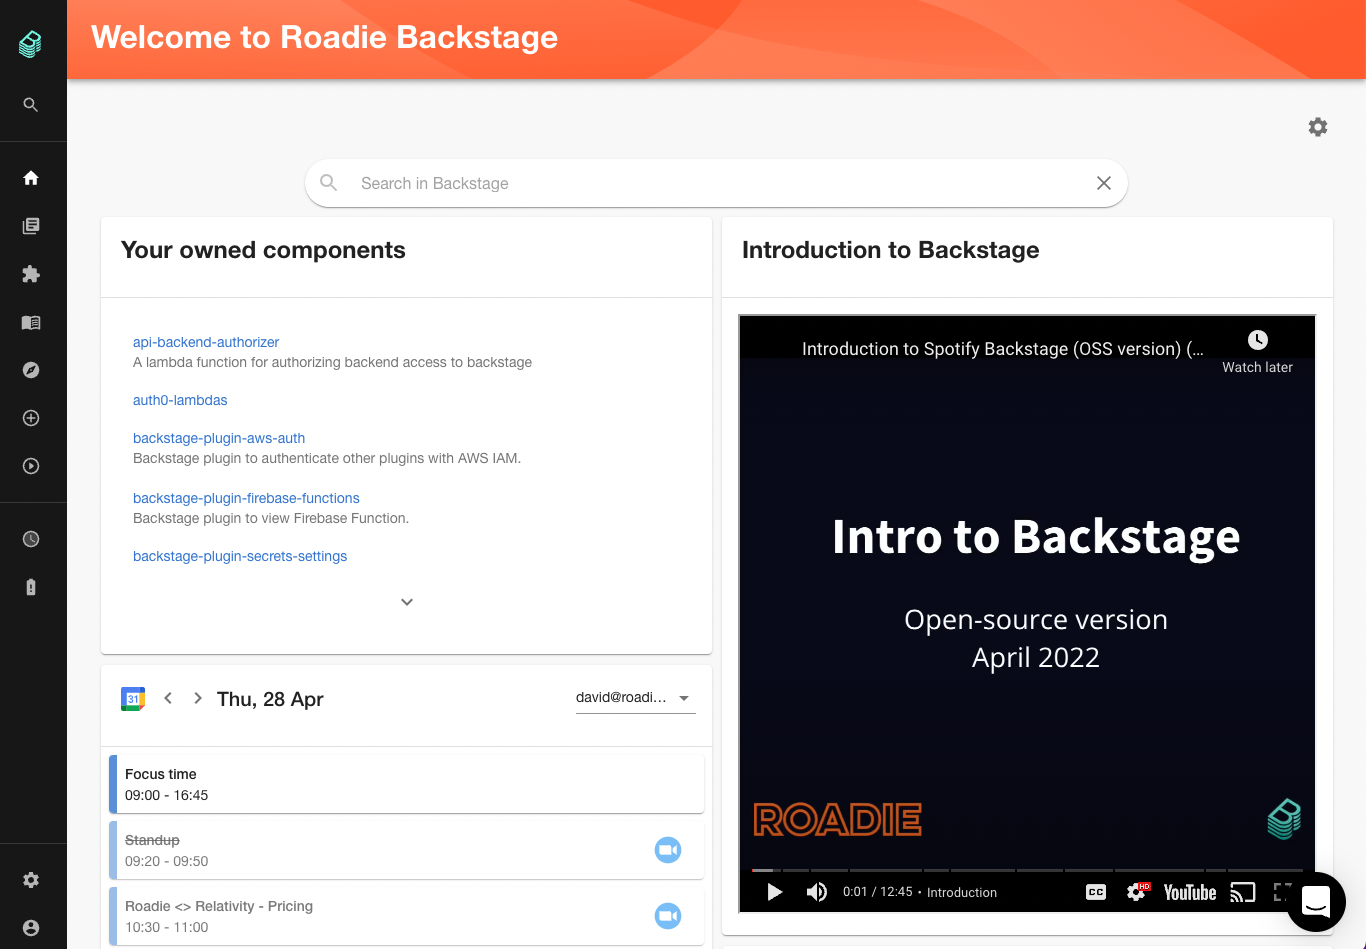 Introduction to Backstage video via iframe